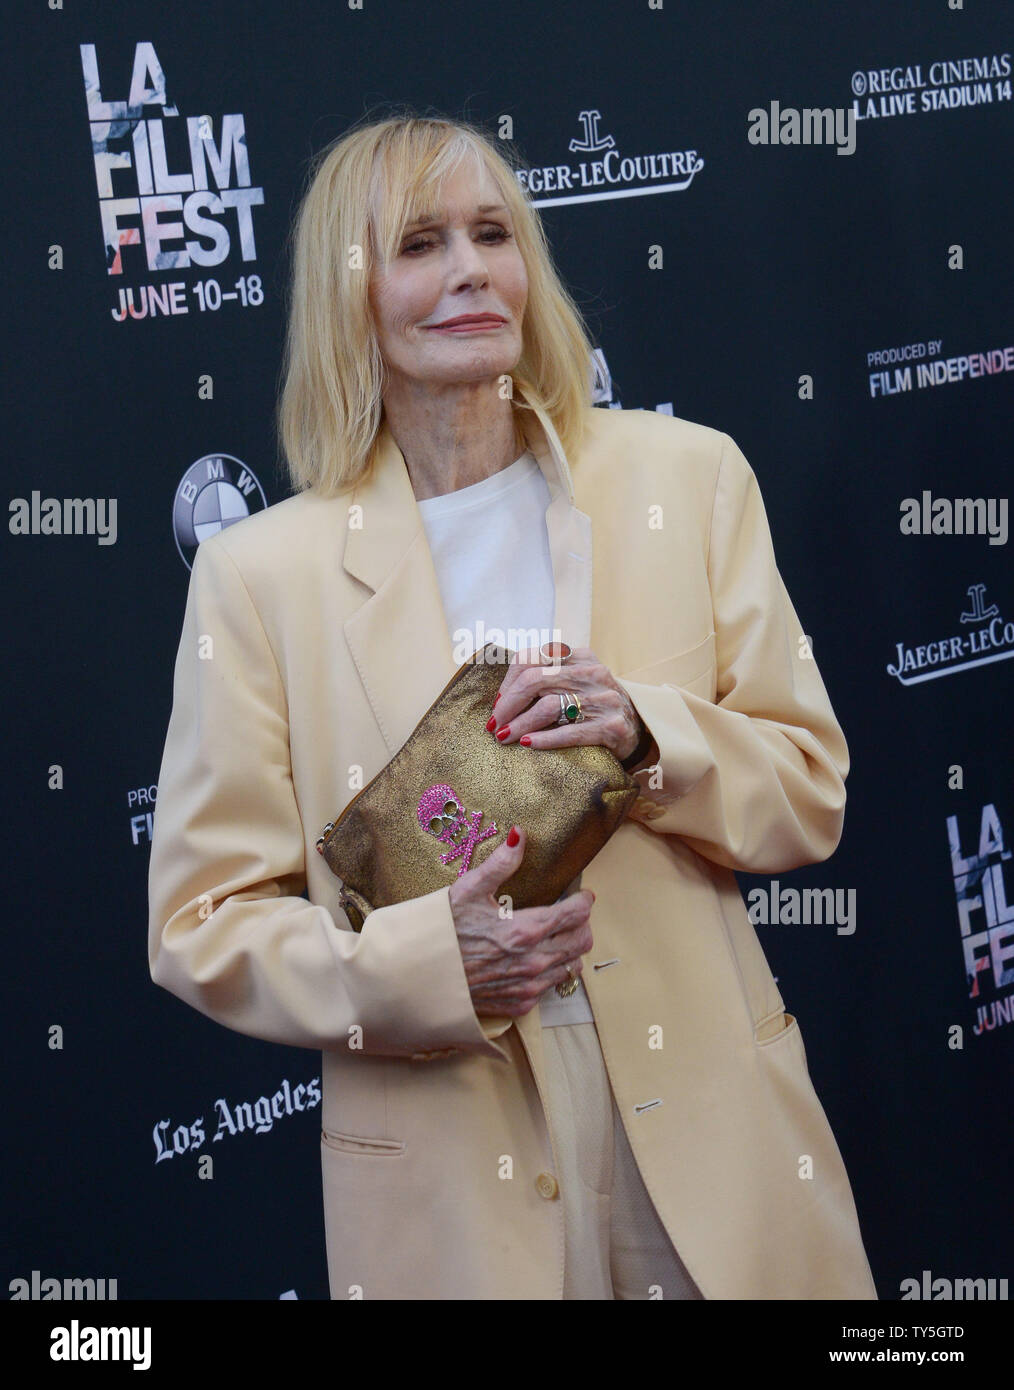 Actress Sally Kellerman attends the premiere of the motion picture comedy 'Grandma' at Regal Cinemas L.A. Live in Los Angeles on June 10, 2015. Storyline: Self-described misanthrope Elle Reid (Tomlin) has her protective bubble burst when her 18-year-old granddaughter, Sage (Garner), shows up needing help. The two of them go on a day-long journey that causes Elle to come to terms with her past and Sage to confront her future.  Photo by Jim Ruymen/UPI Stock Photo